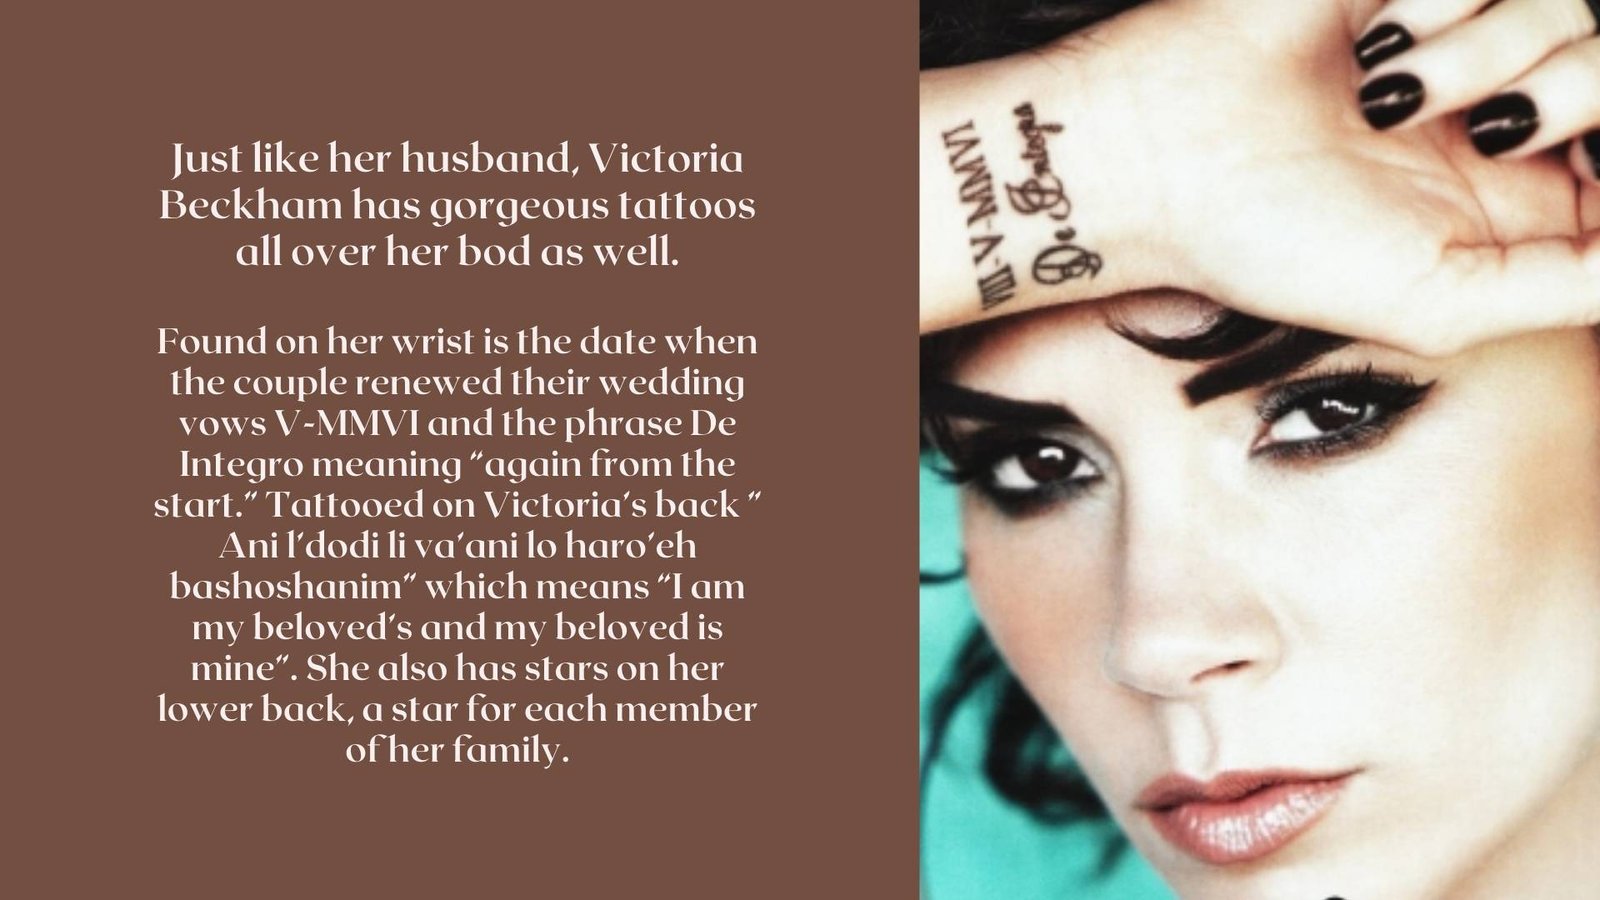 Victoria Beckham’s Tattoos & Their Meanings